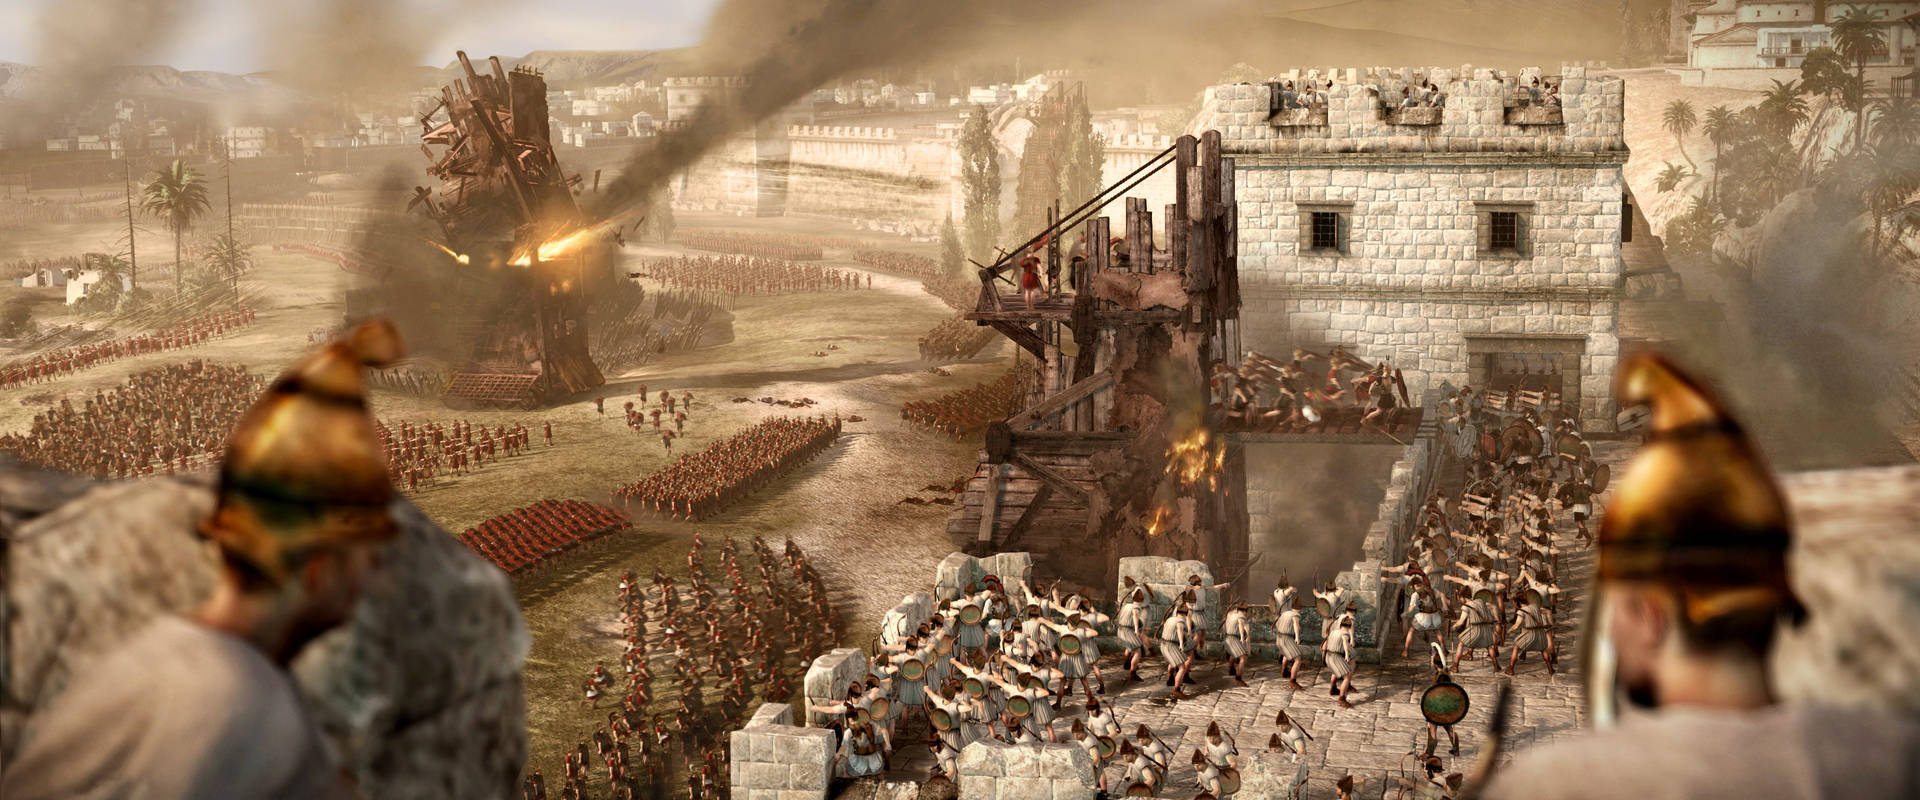 Total War Rome 2 Computer Game Background